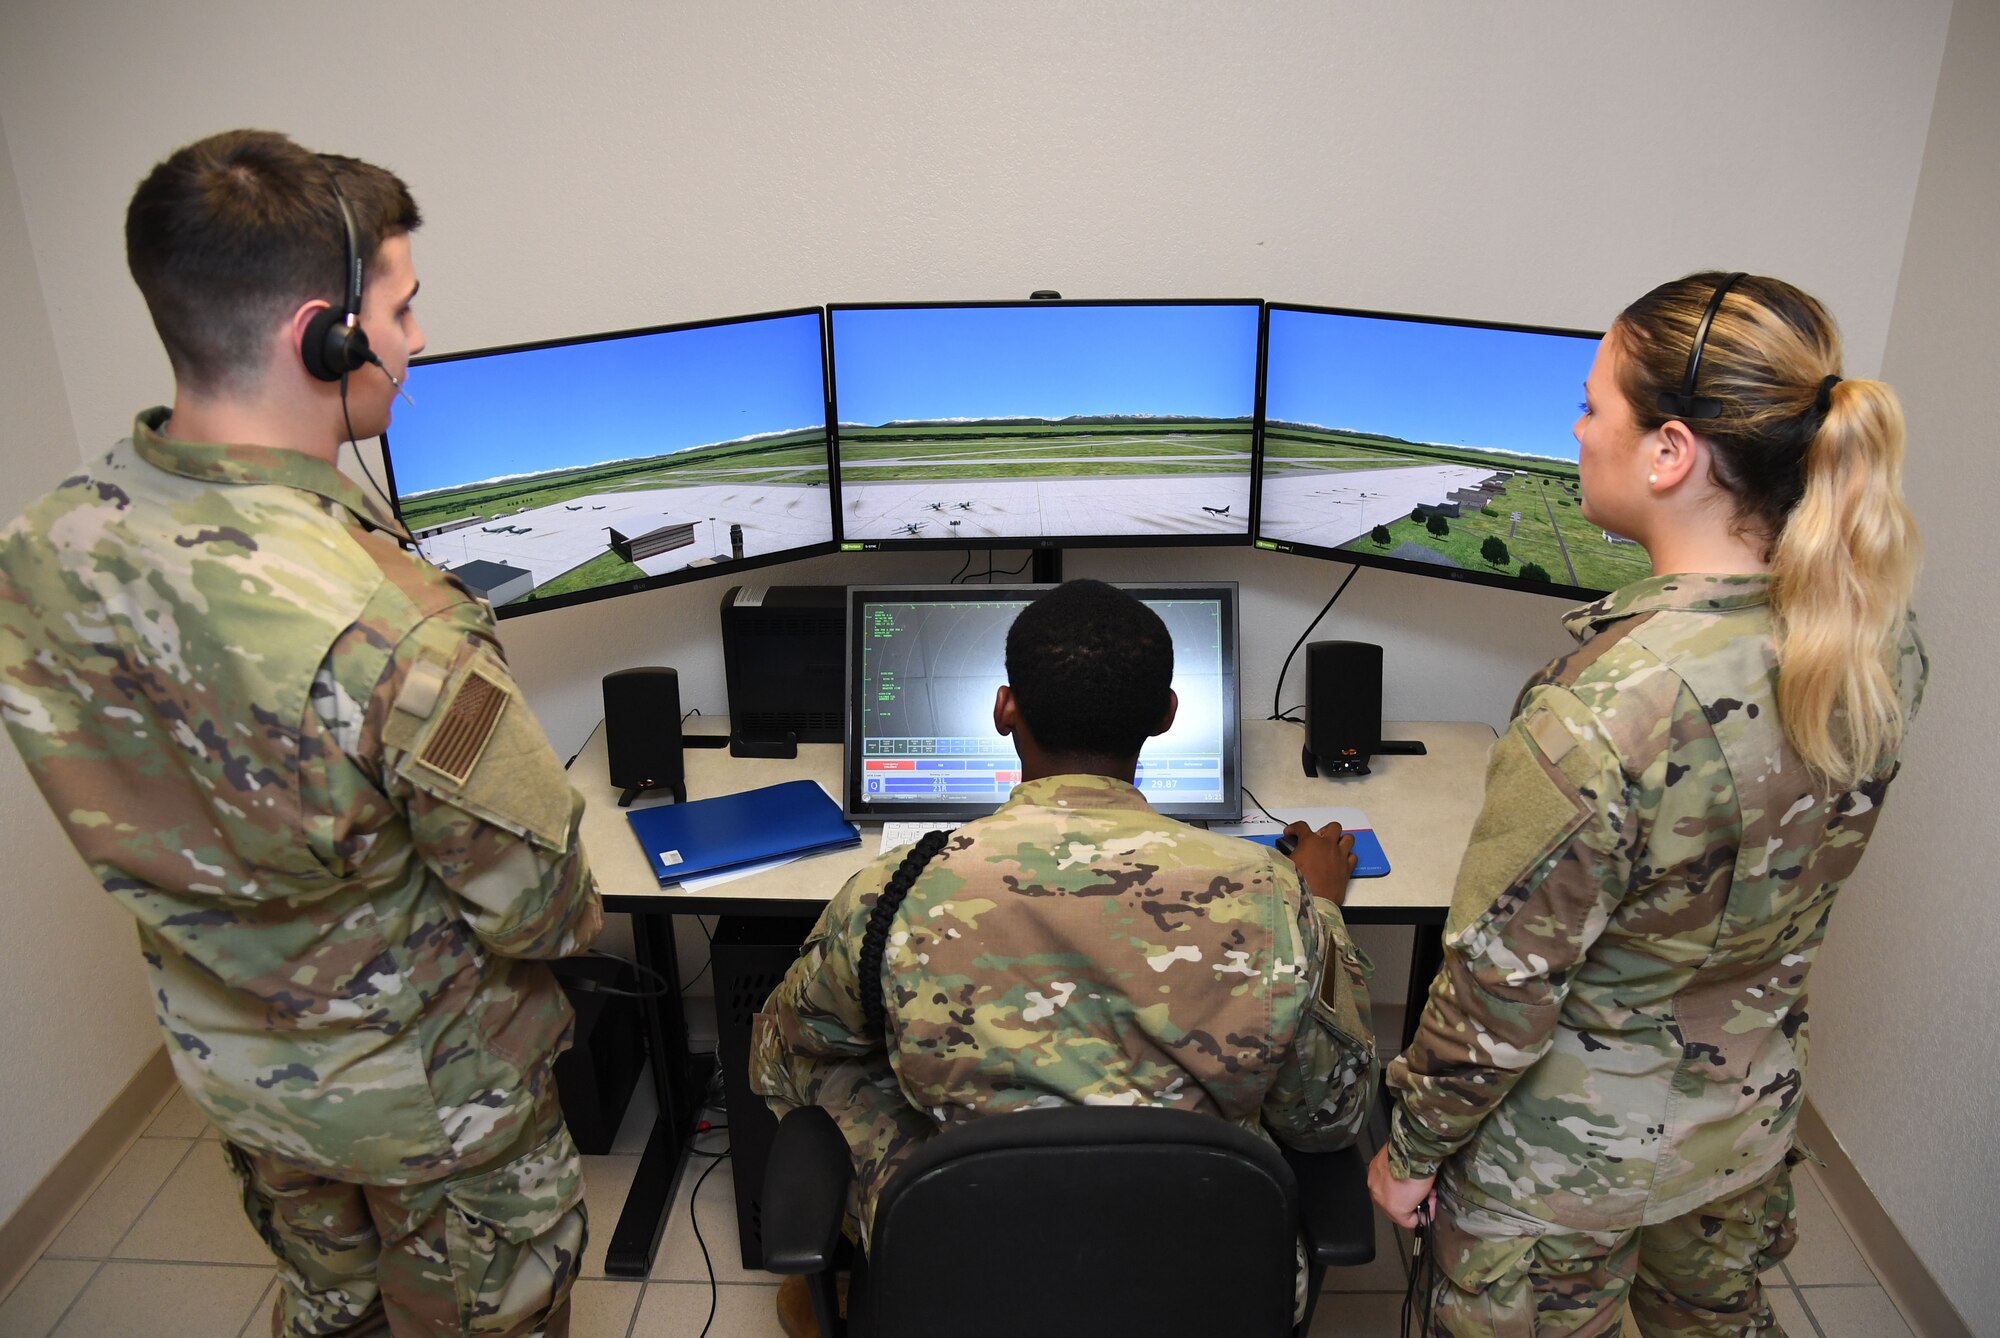 U.S. Air Force Airmen Luke Pietrykowski, Jayden Ali and Isabella Fitzegerald, 334th Training Squadron students, use a condensed air traffic control tower simulator for training inside Erwin Manor at Keesler Air Force Base, Mississippi, April 13, 2022. Four trainers were installed to allow students the opportunity to increase tower control contact hours and to provide students additional study and familiarization time outside the classroom. (U.S. Air Force photo by Kemberly Groue)